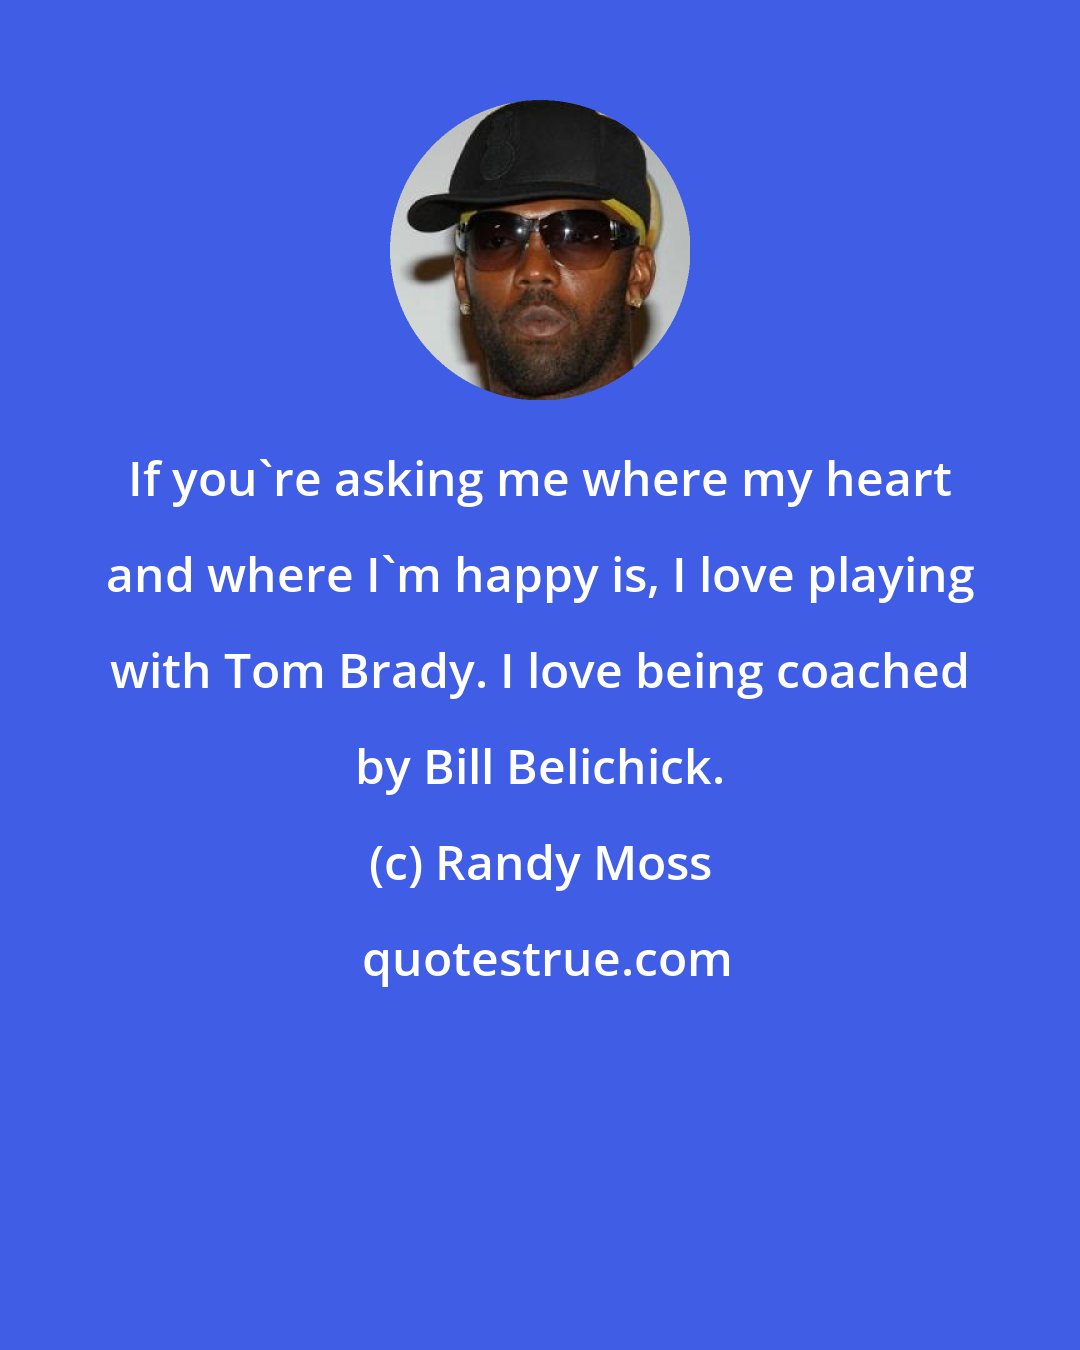 Randy Moss: If you're asking me where my heart and where I'm happy is, I love playing with Tom Brady. I love being coached by Bill Belichick.